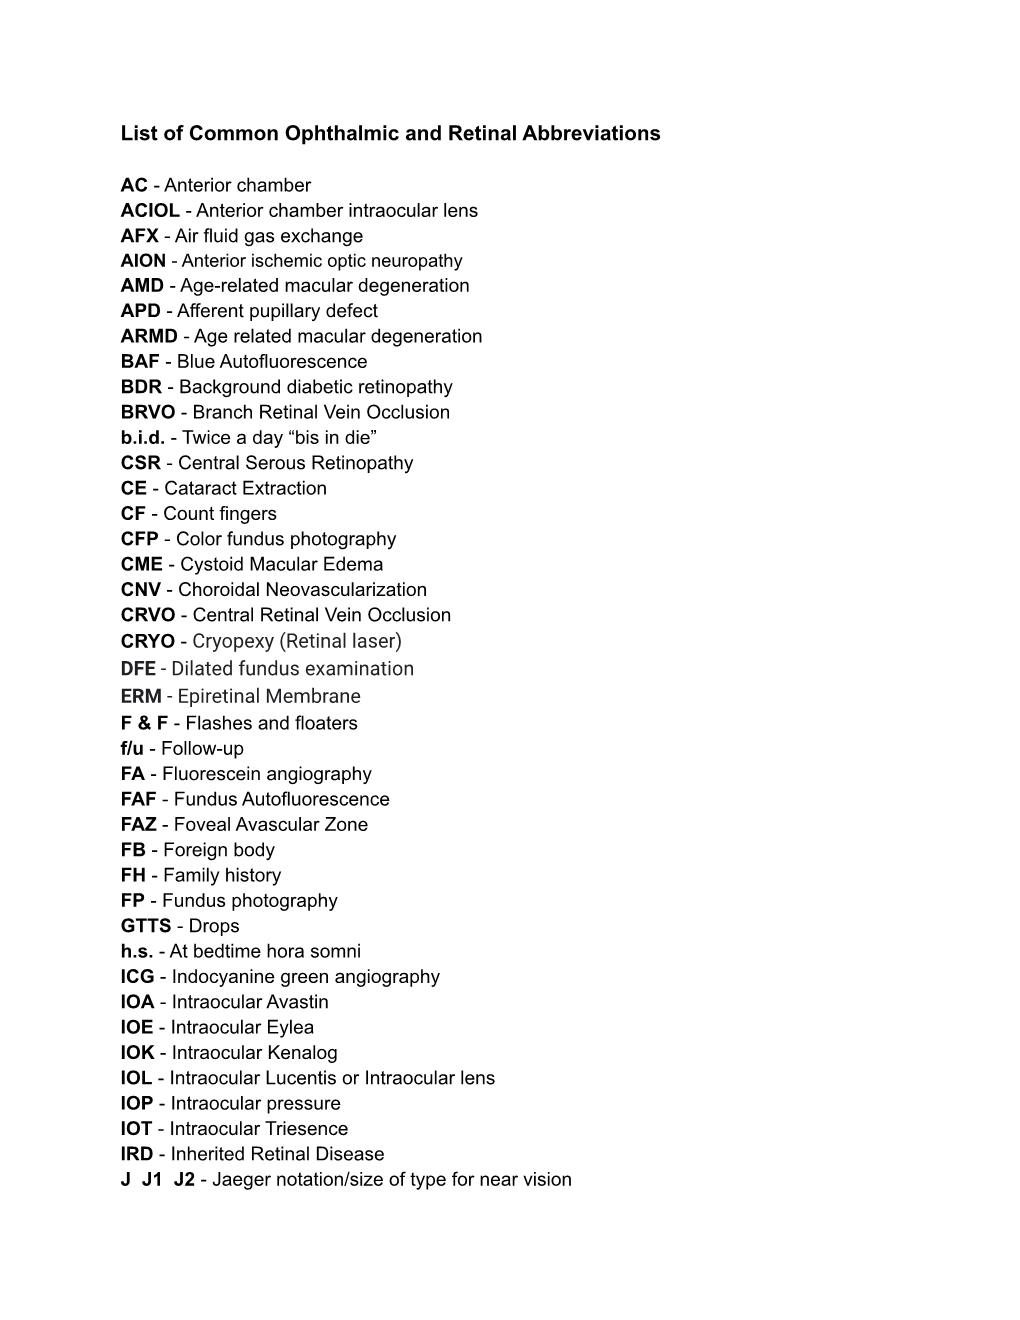 List of Common Ophthalmic and Retinal Abbreviations